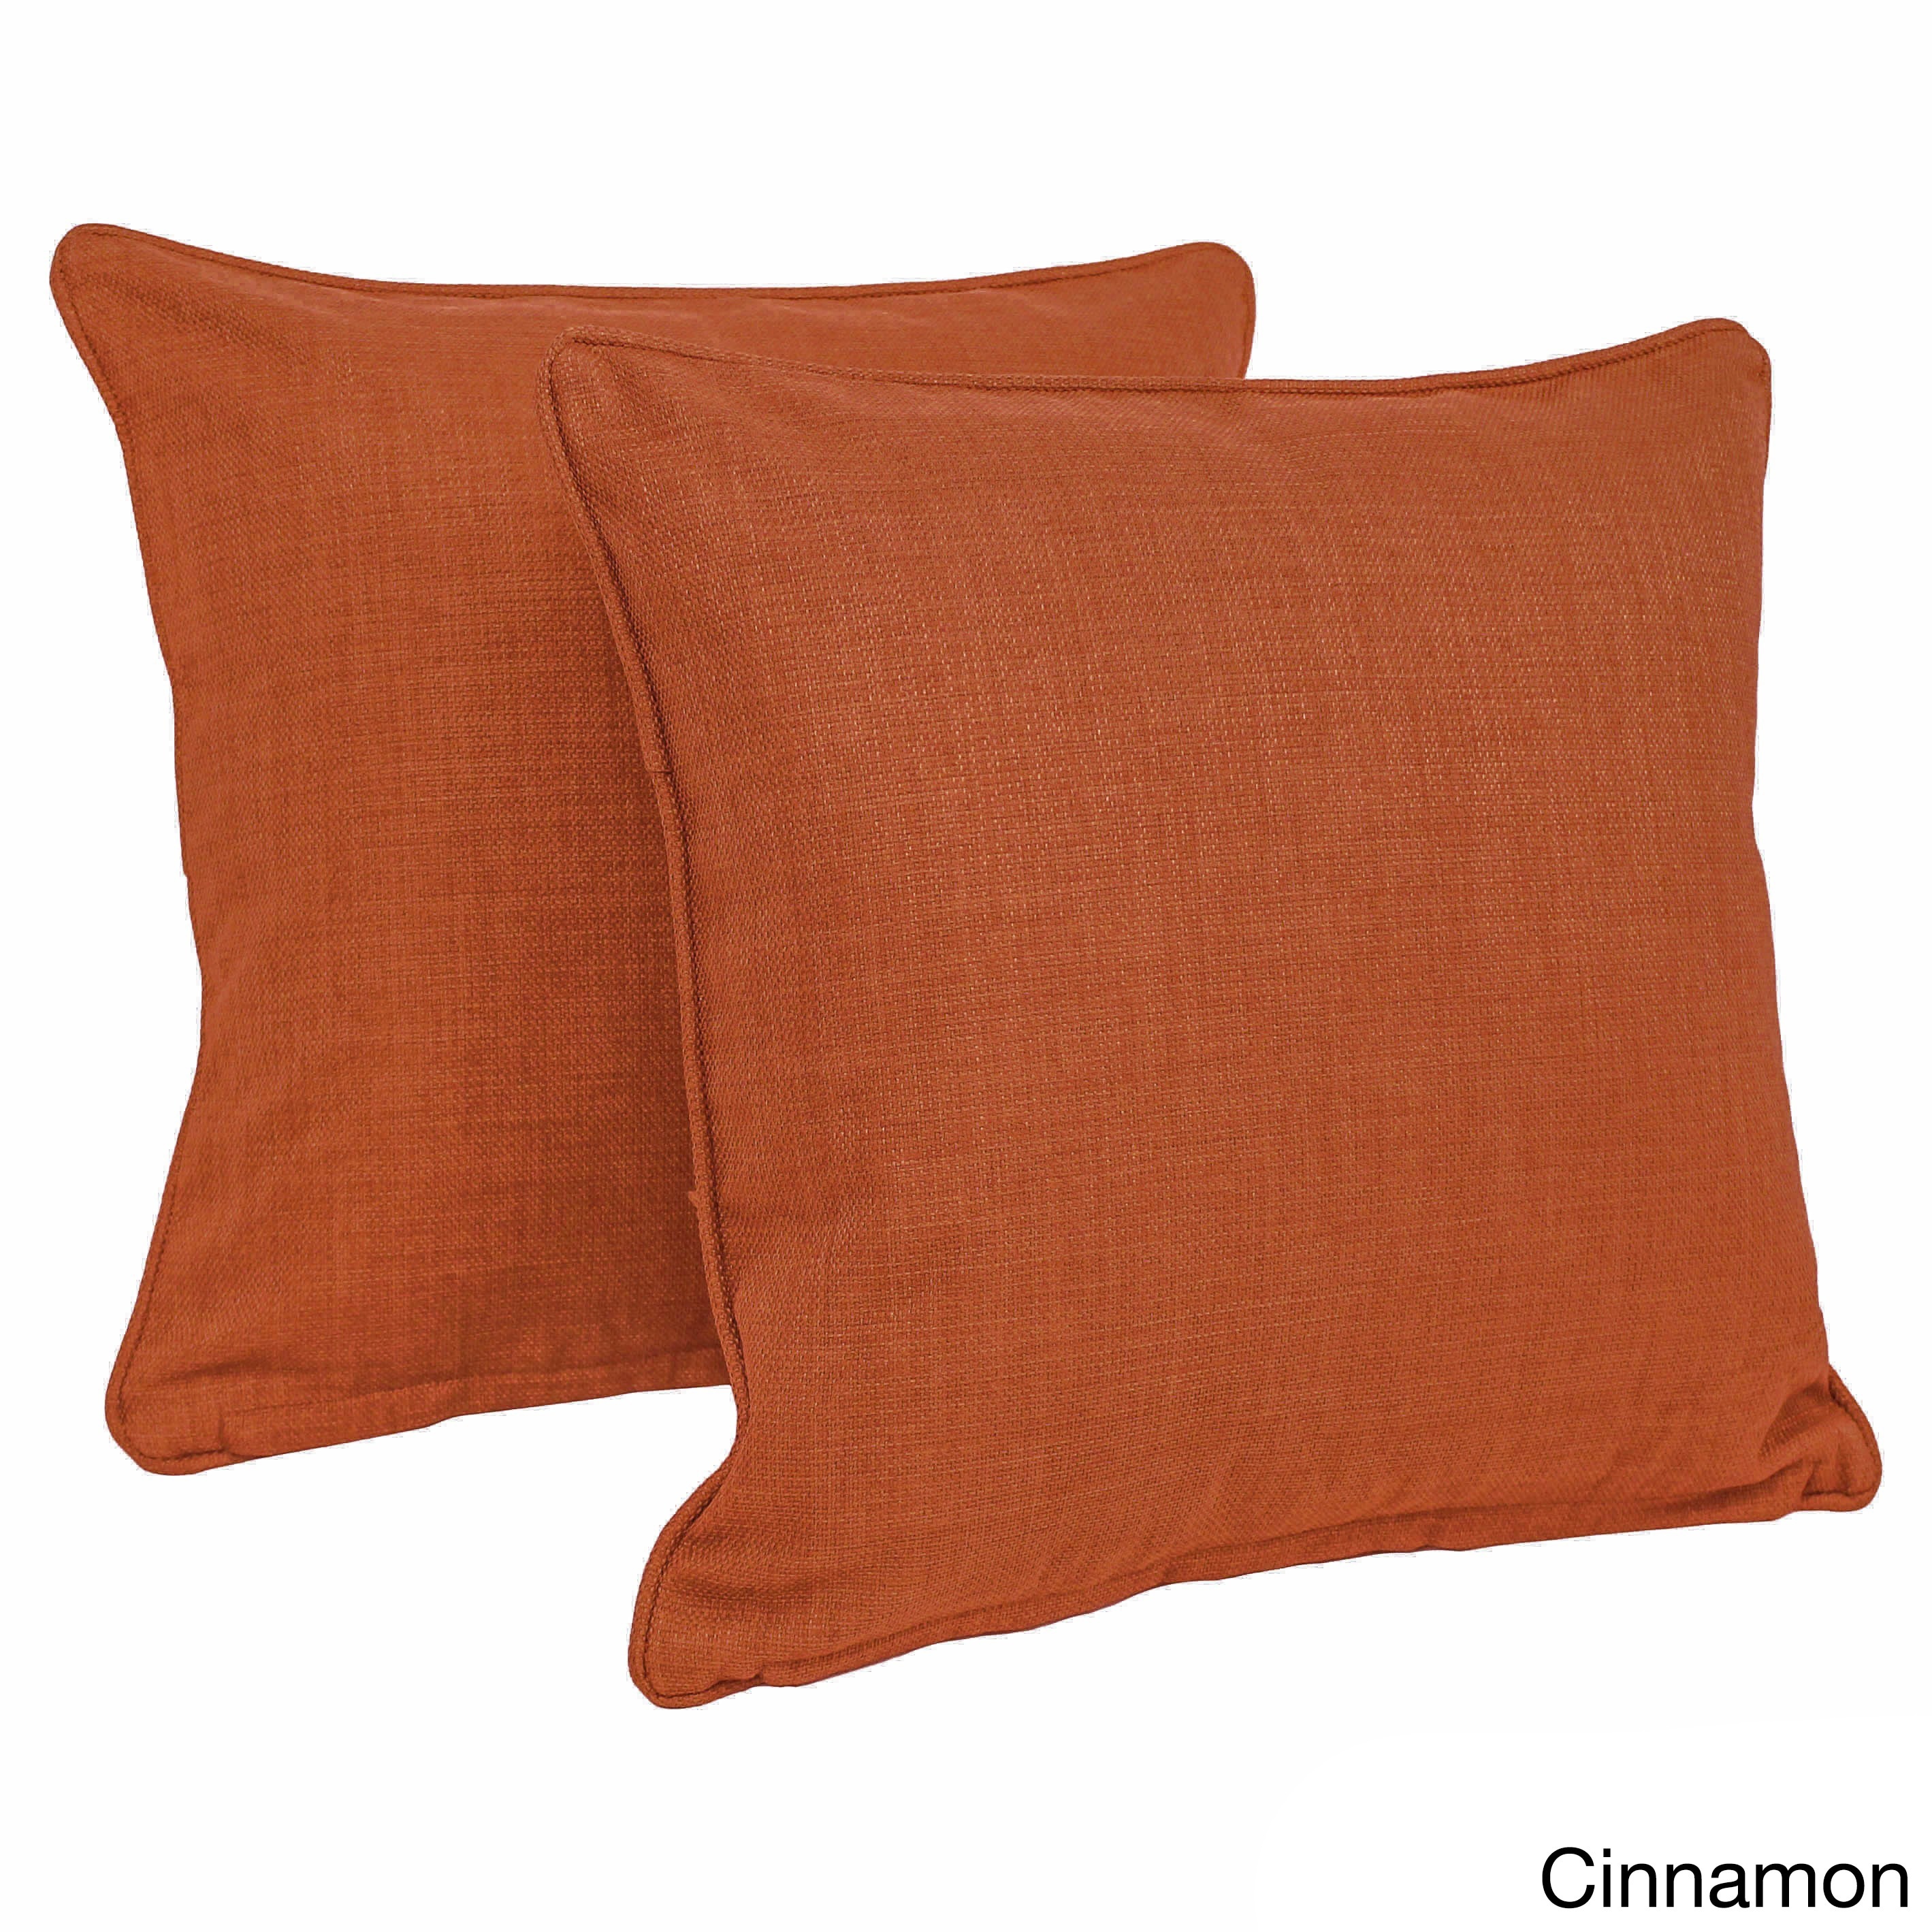 Blazing Needles 17-inch All-Weather Throw Pillow (Set of 2)